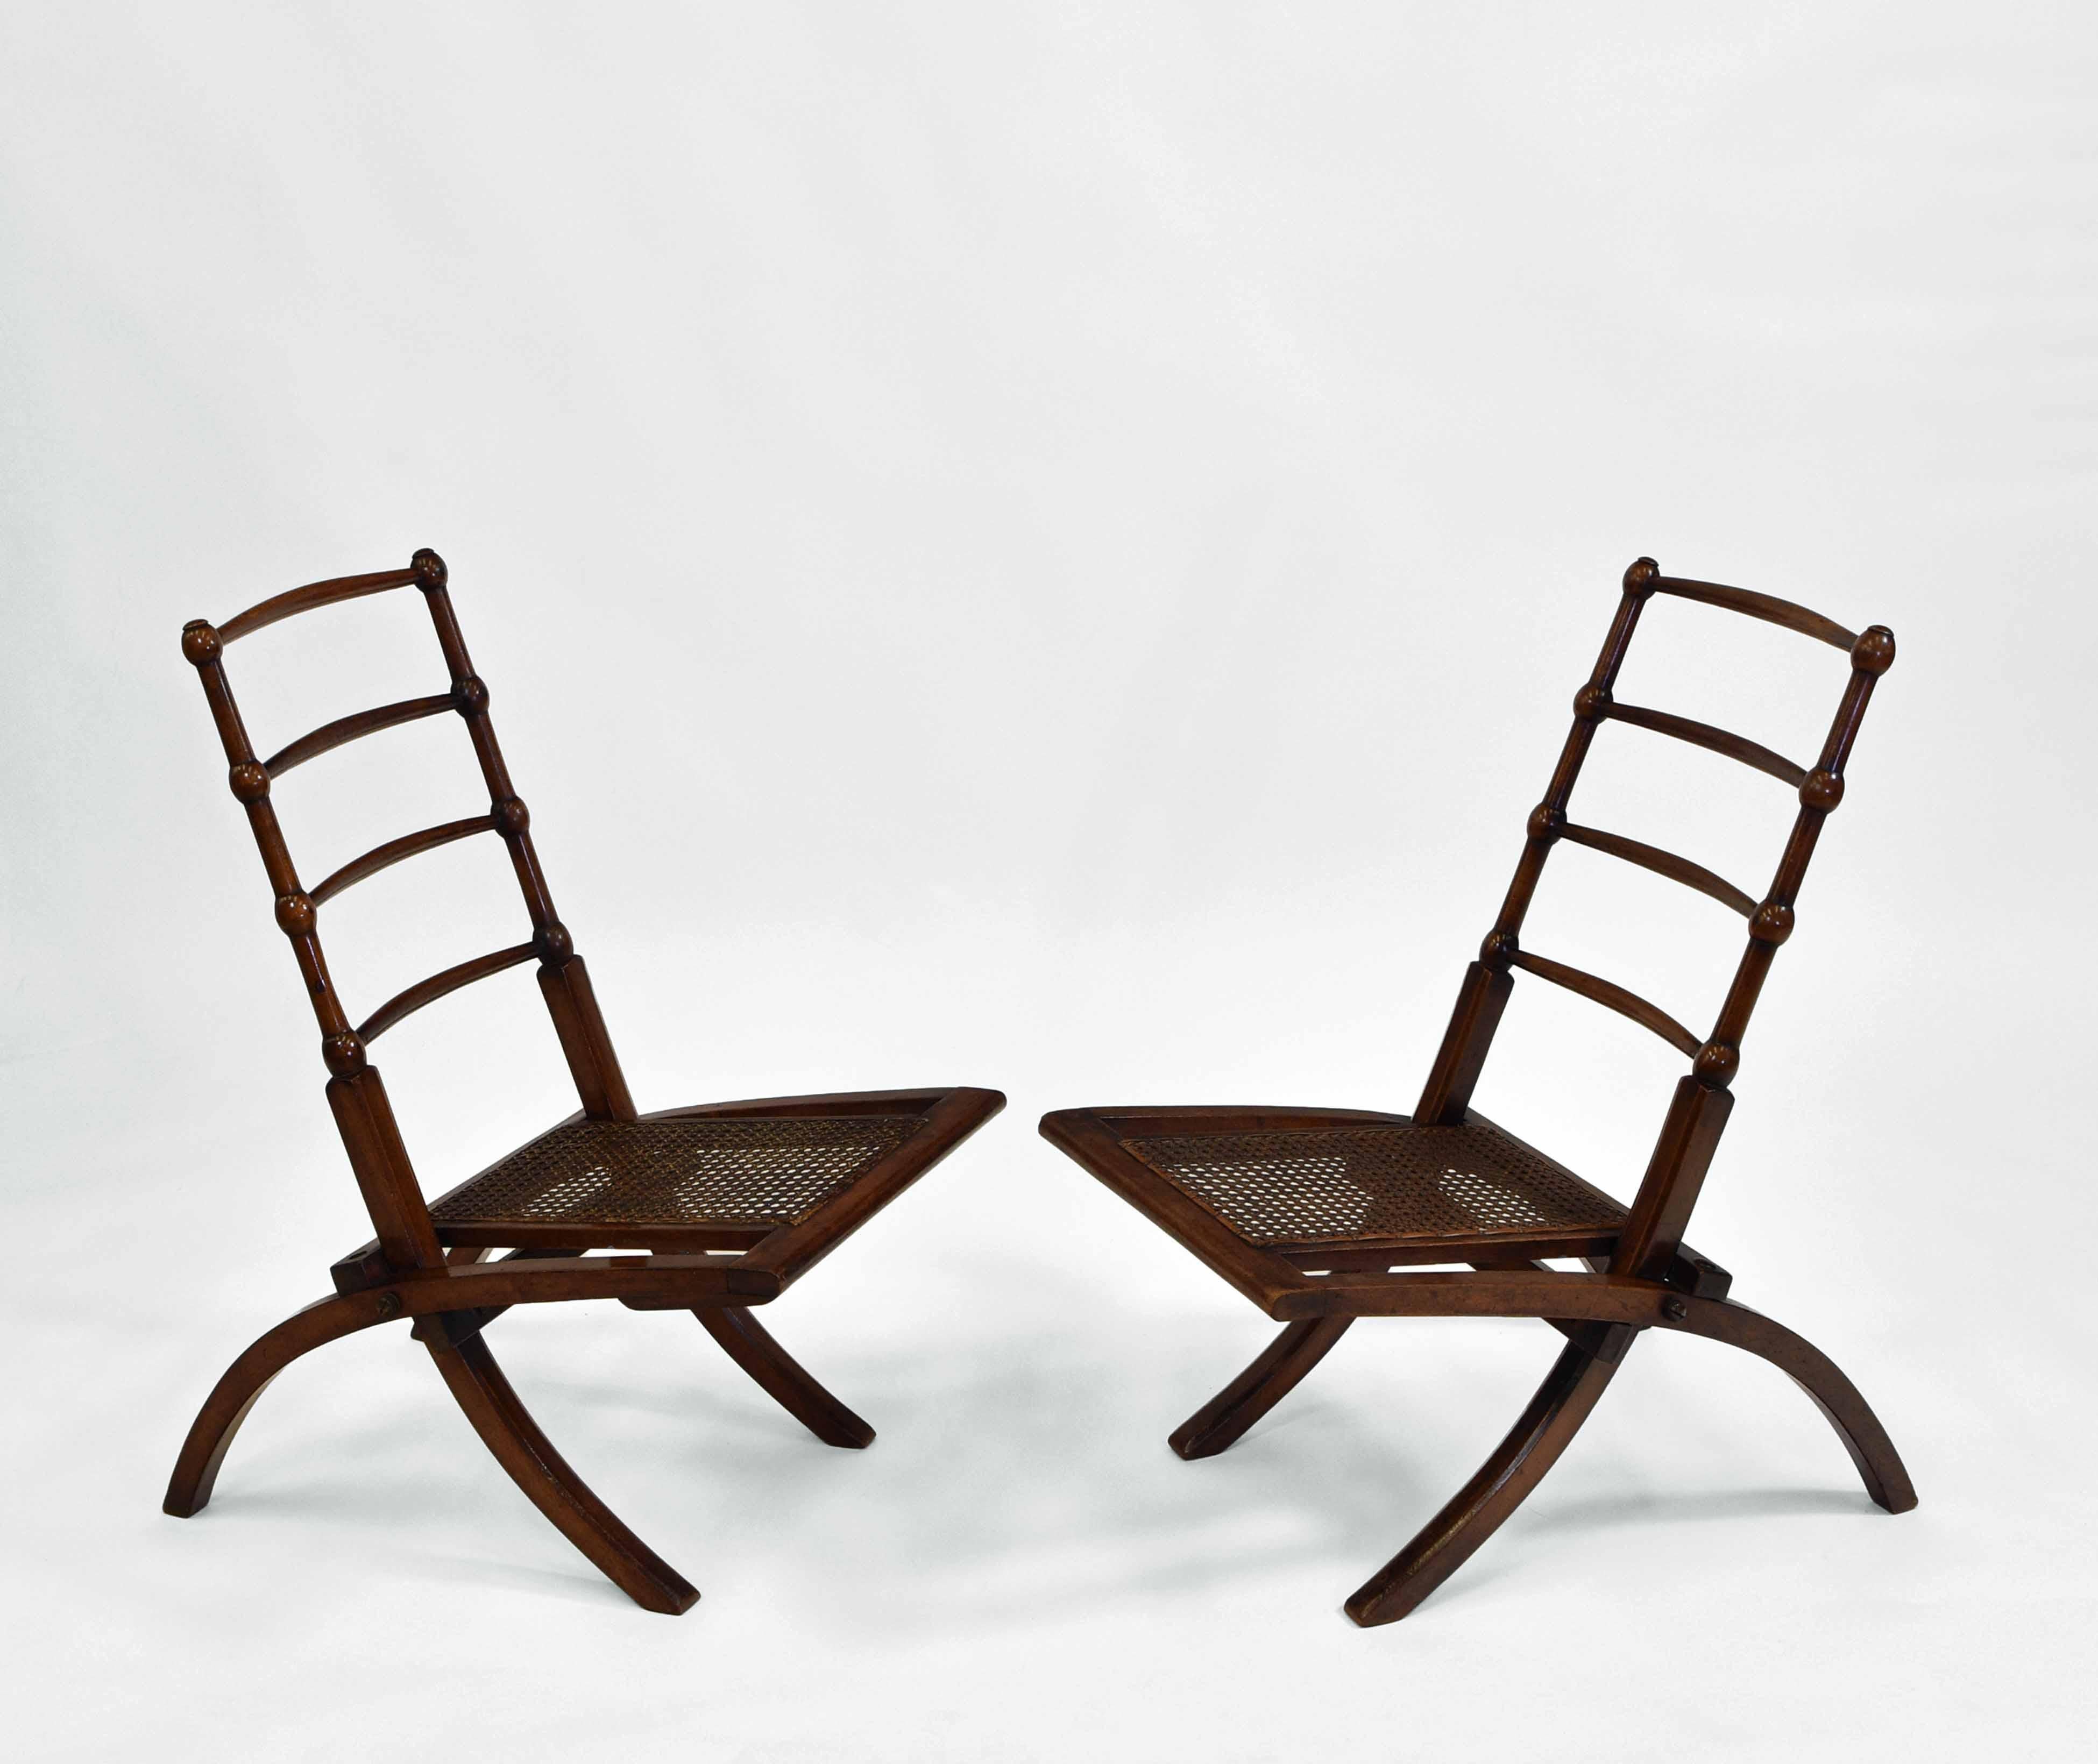 A pair of Aesthetic Movement small walnut low folding decorative chairs with cane seats, in the manner of E.W. Godwin. Circa 1870s.

Free delivery to the UK via a selected parcel company.

The walnut frames are in very good condition and have